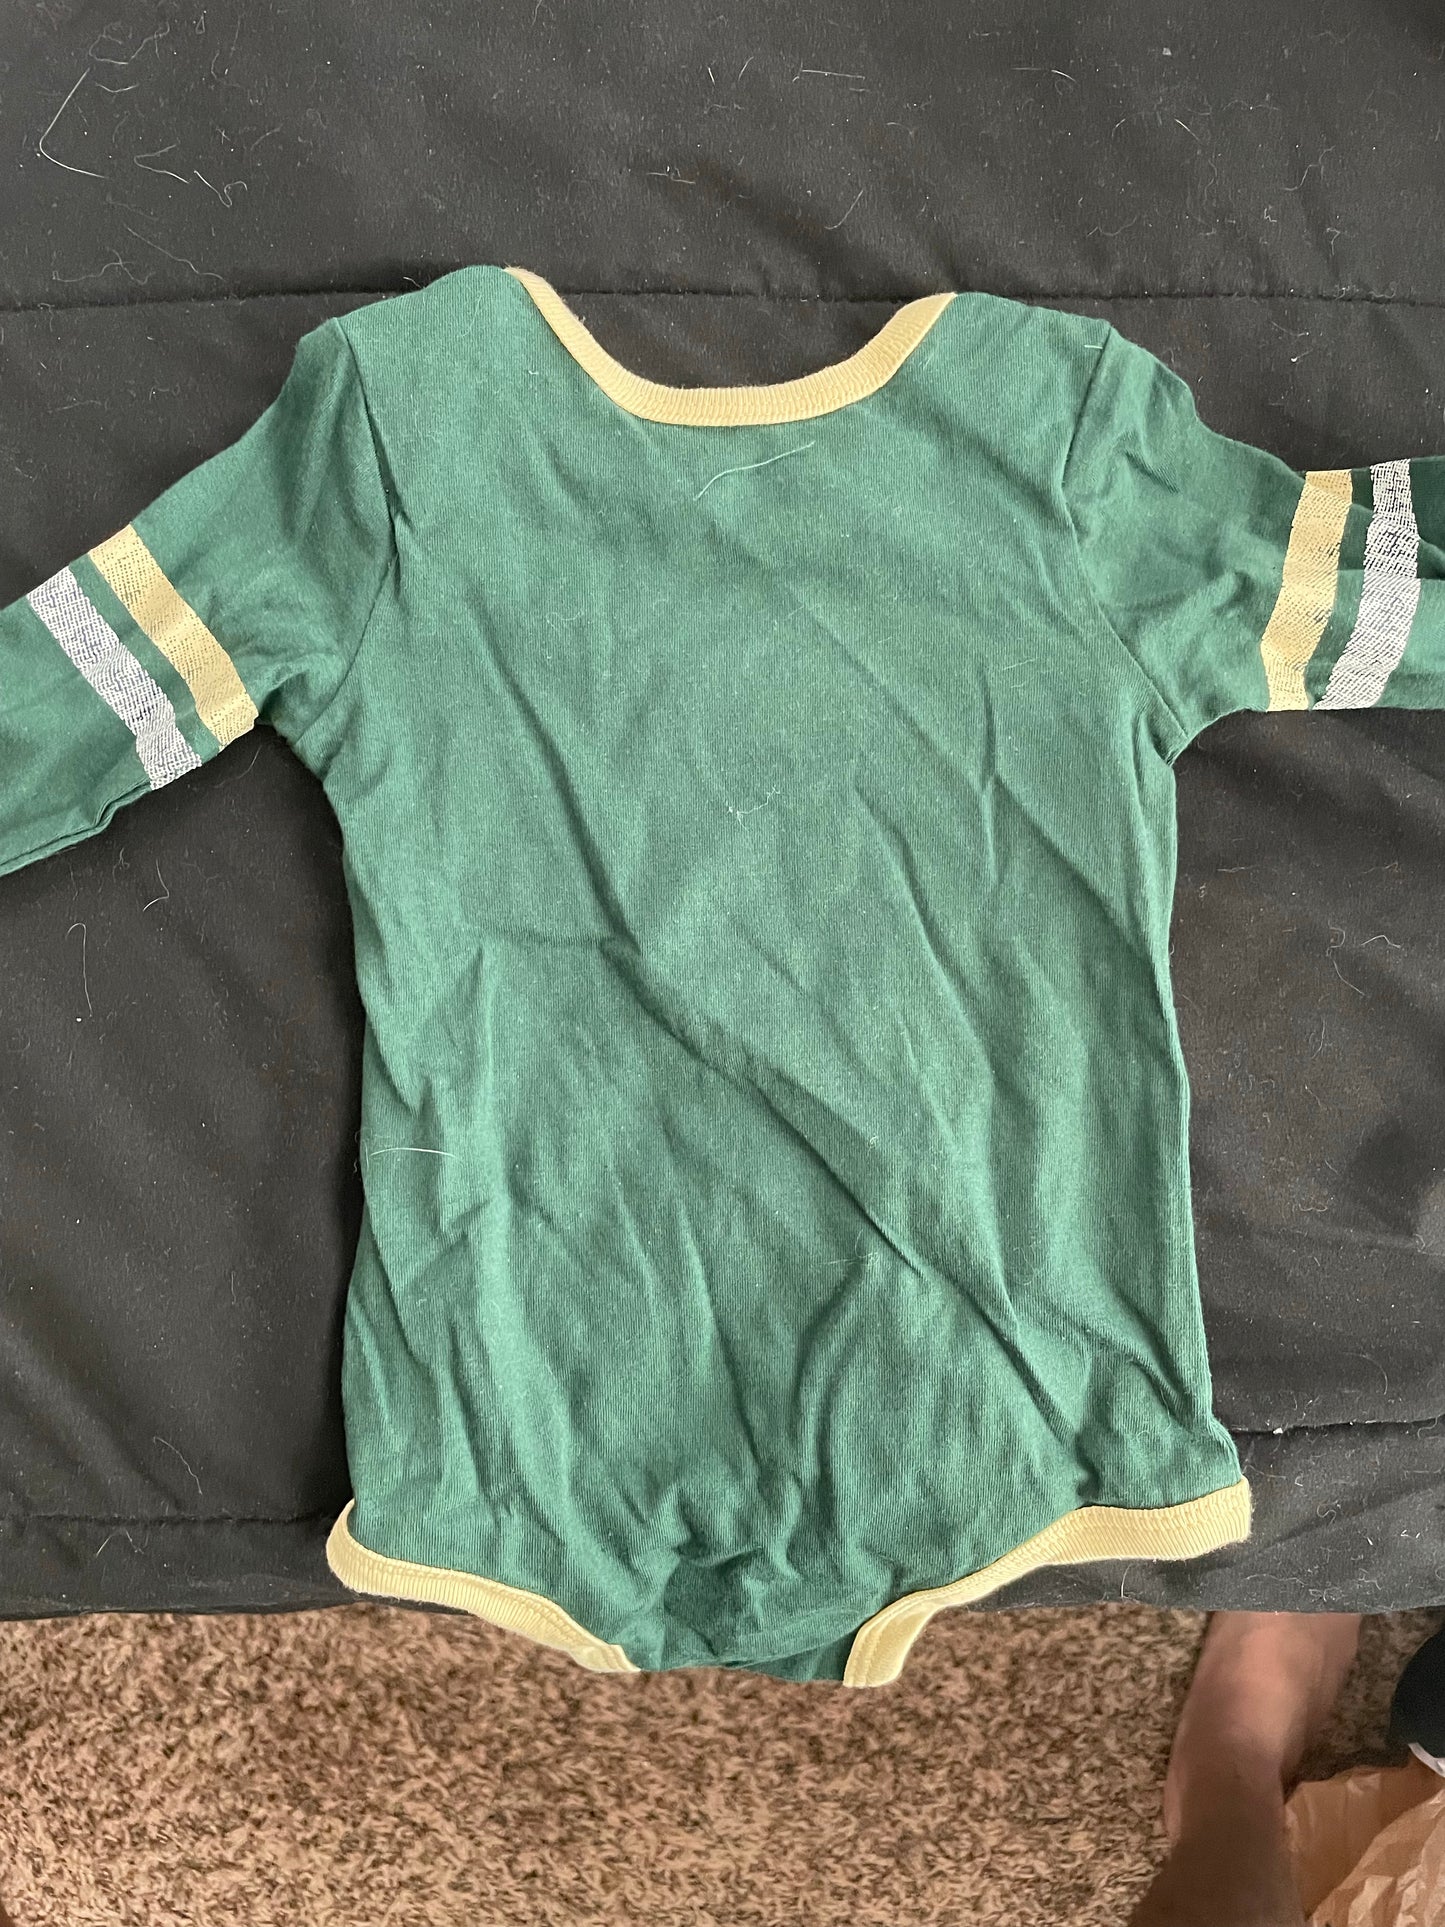 Charlotte 49ers Green Baby Outfit